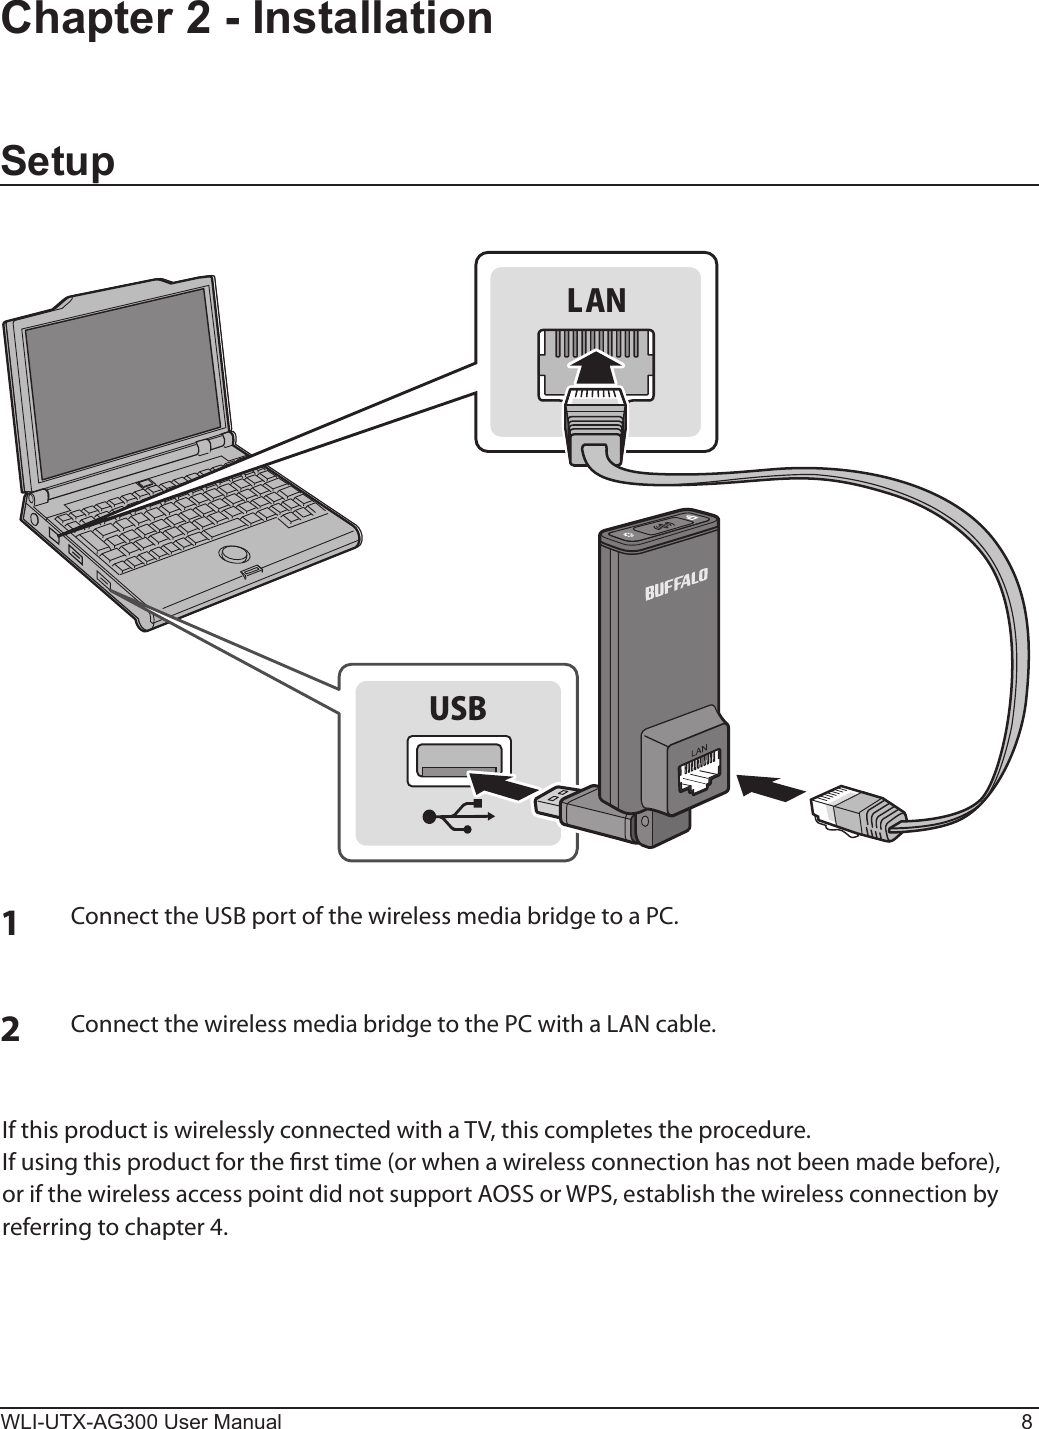 WLI-UTX-AG300 User Manual 8Chapter 2 - InstallationSetup1Connect the USB port of the wireless media bridge to a PC.2Connect the wireless media bridge to the PC with a LAN cable.USBLANIf this product is wirelessly connected with a TV, this completes the procedure.If using this product for the rst time (or when a wireless connection has not been made before), or if the wireless access point did not support AOSS or WPS, establish the wireless connection by referring to chapter 4.